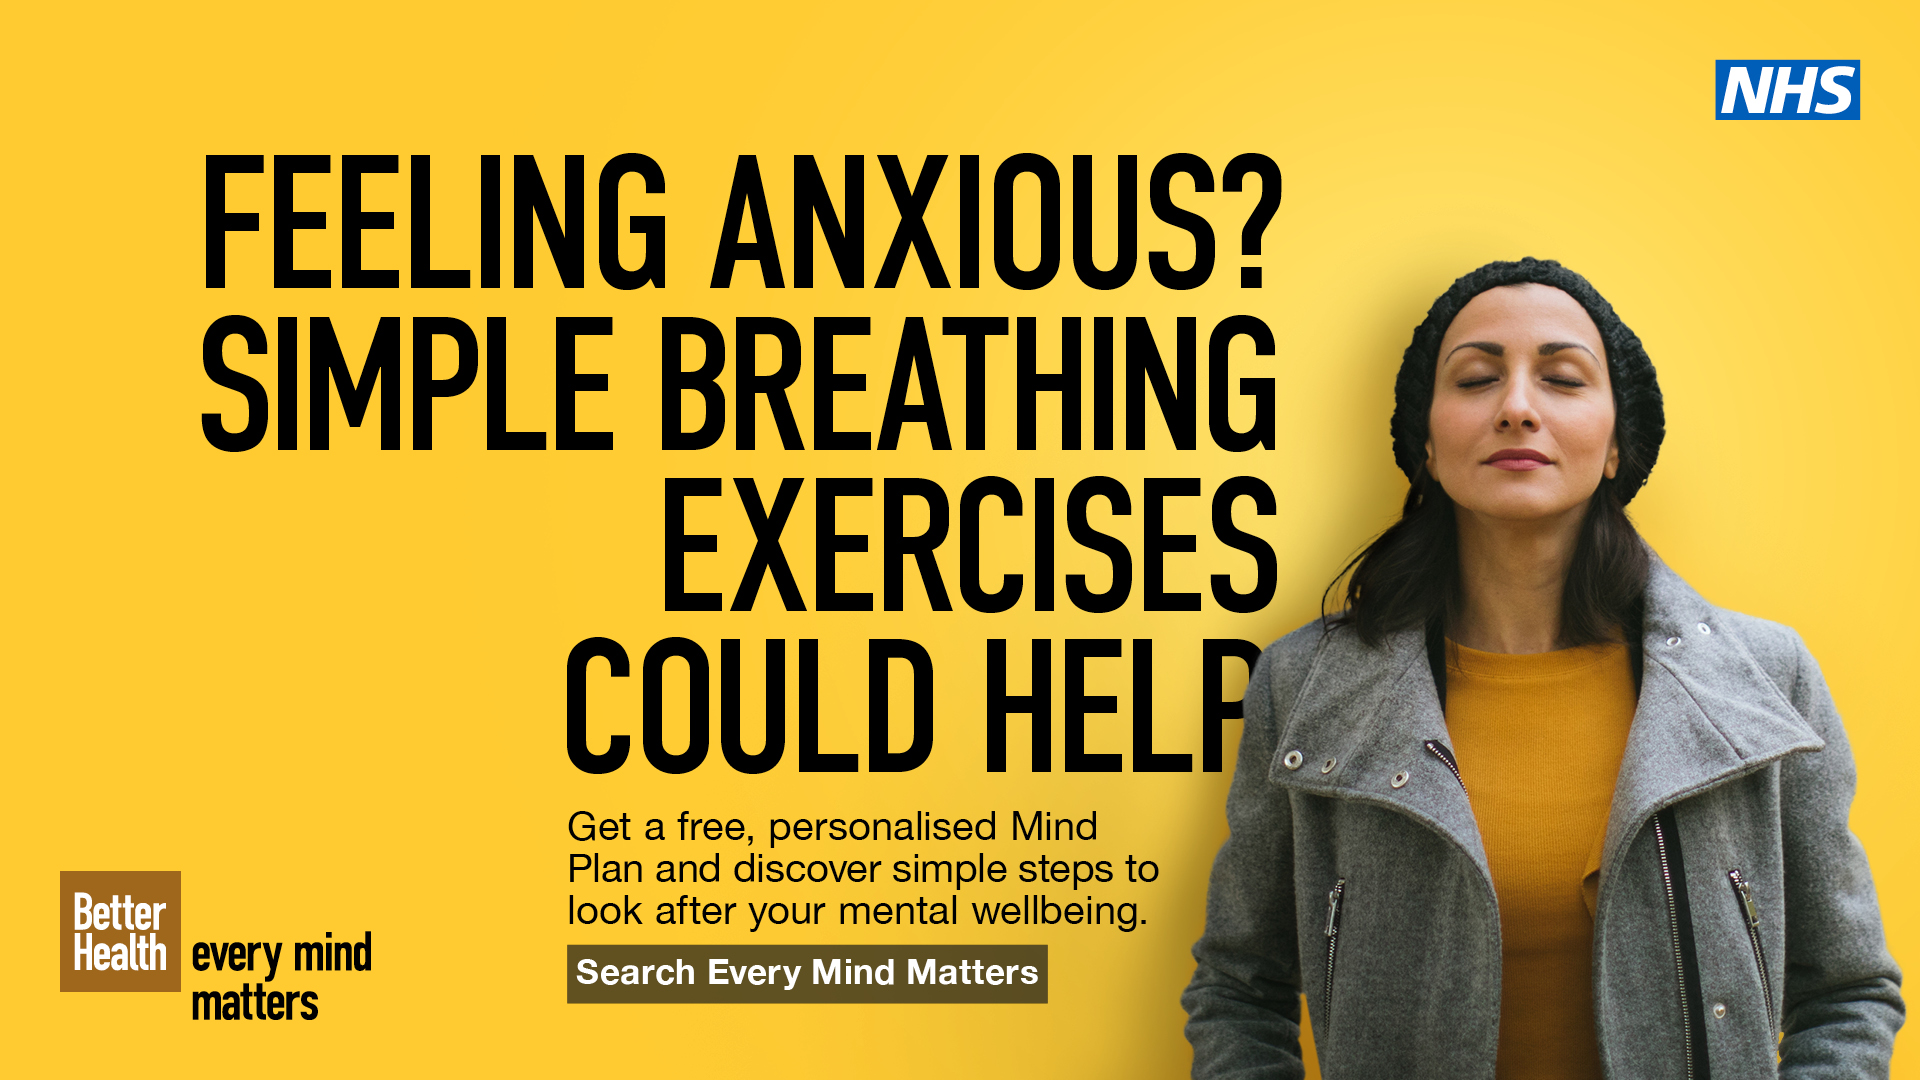 Feeling anxious? Simple breathing exercises could help. Get a free, personalised Mind Plan and discover simple steps to look after you mental wellbeing. Search Every Mind Matters